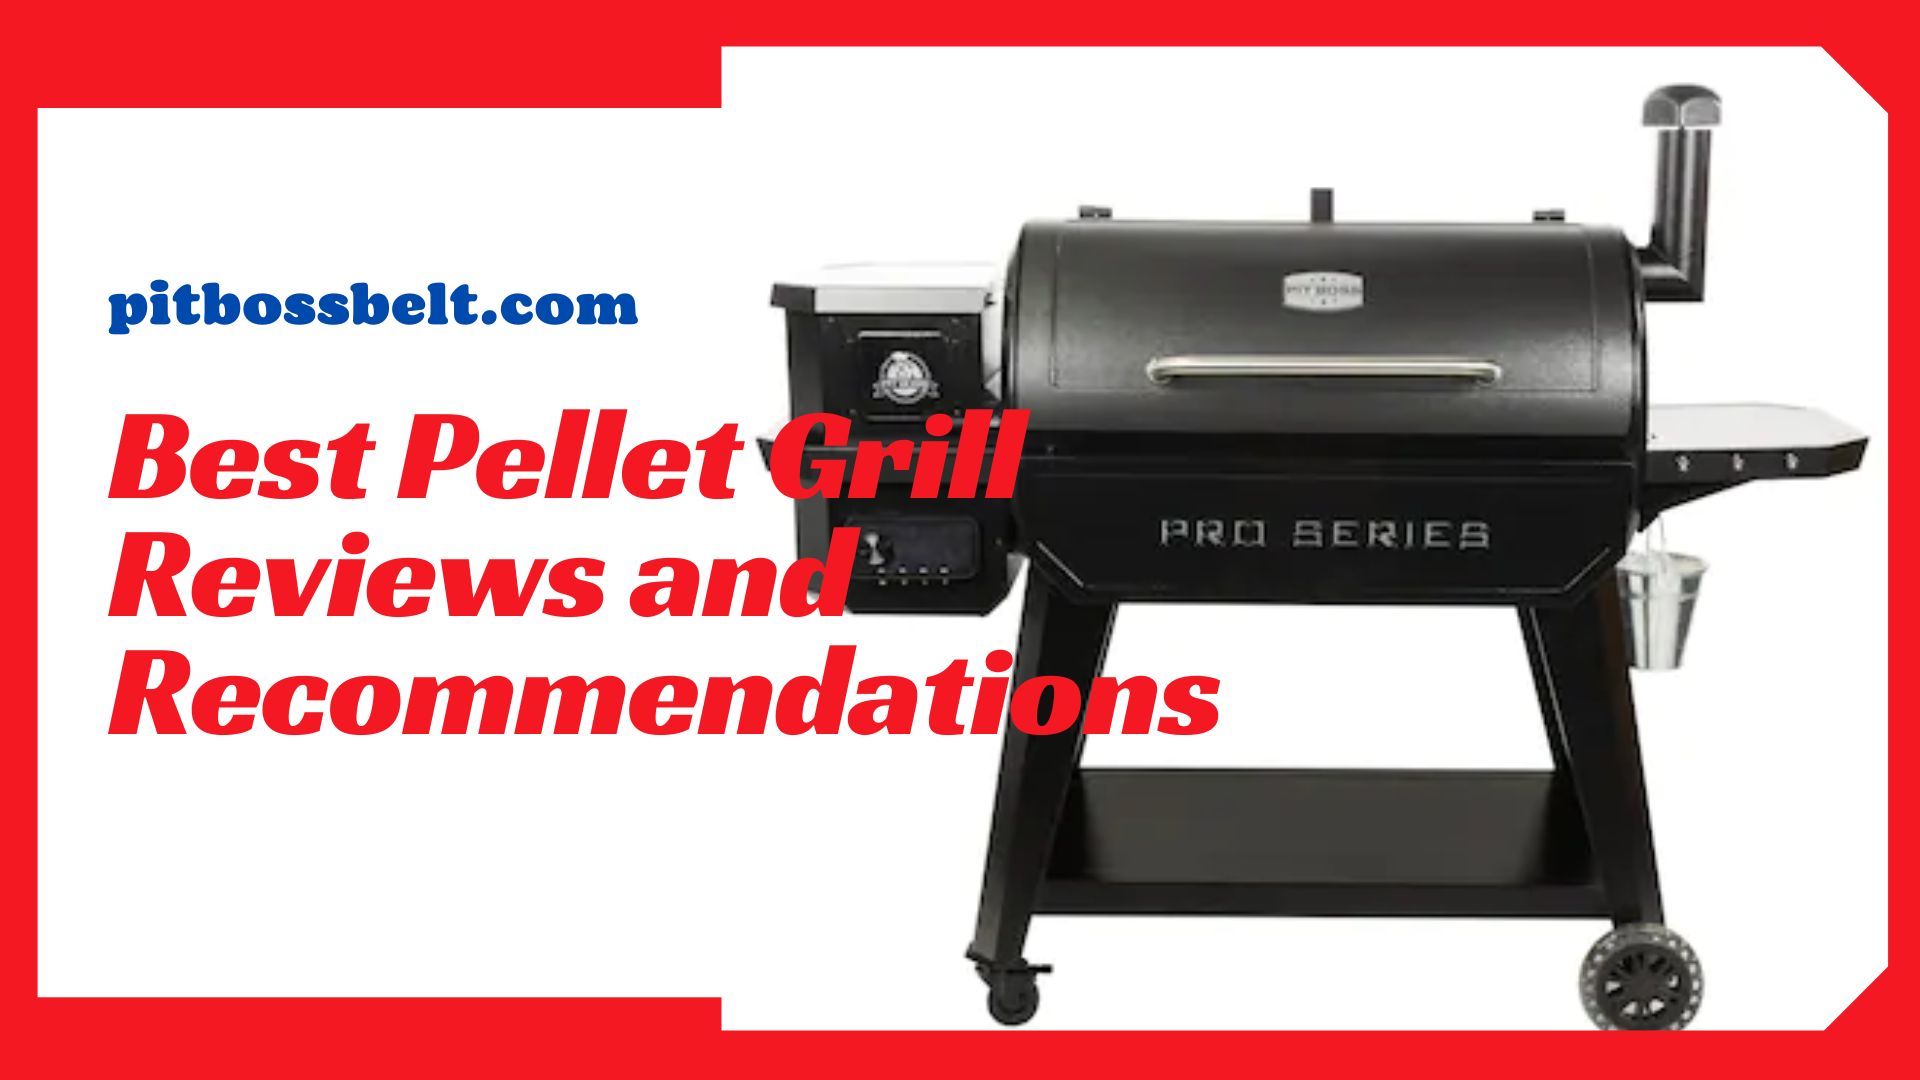 Best Pellet Grill Reviews and Recommendations (1)